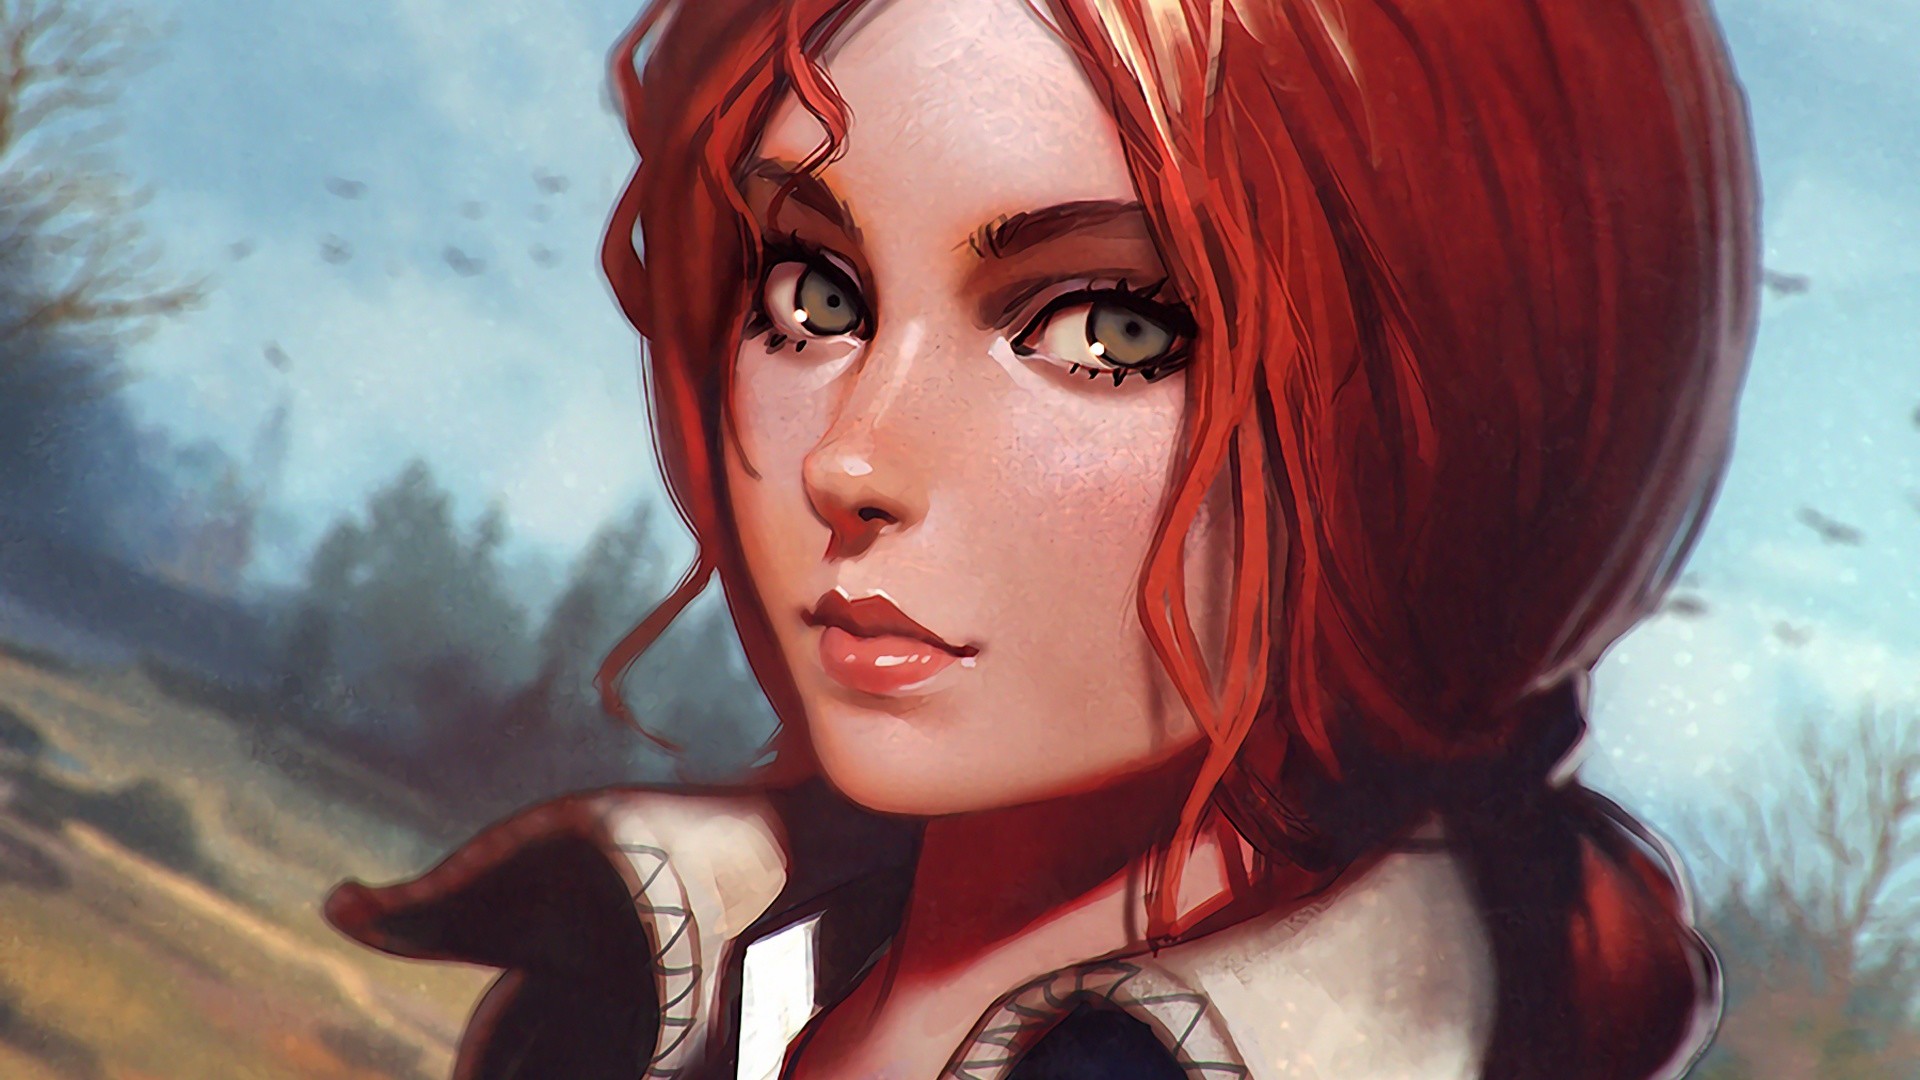 1920x1080 Video Game - The Witcher 3: Wild Hunt Face Triss Merigold Red Hair Wallpaper